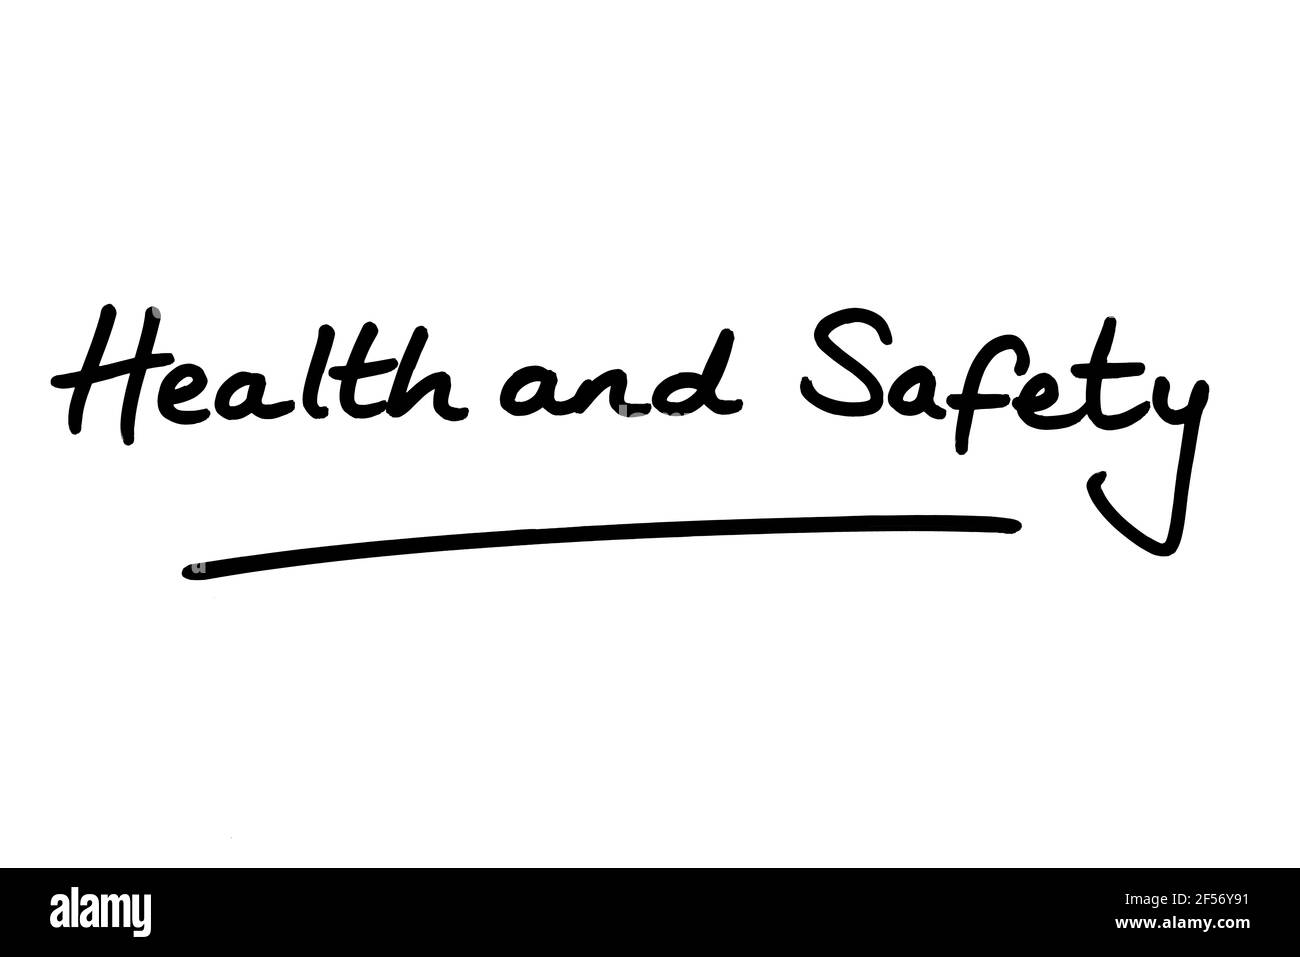 Health and Safety, handwritten on a white background. Stock Photo